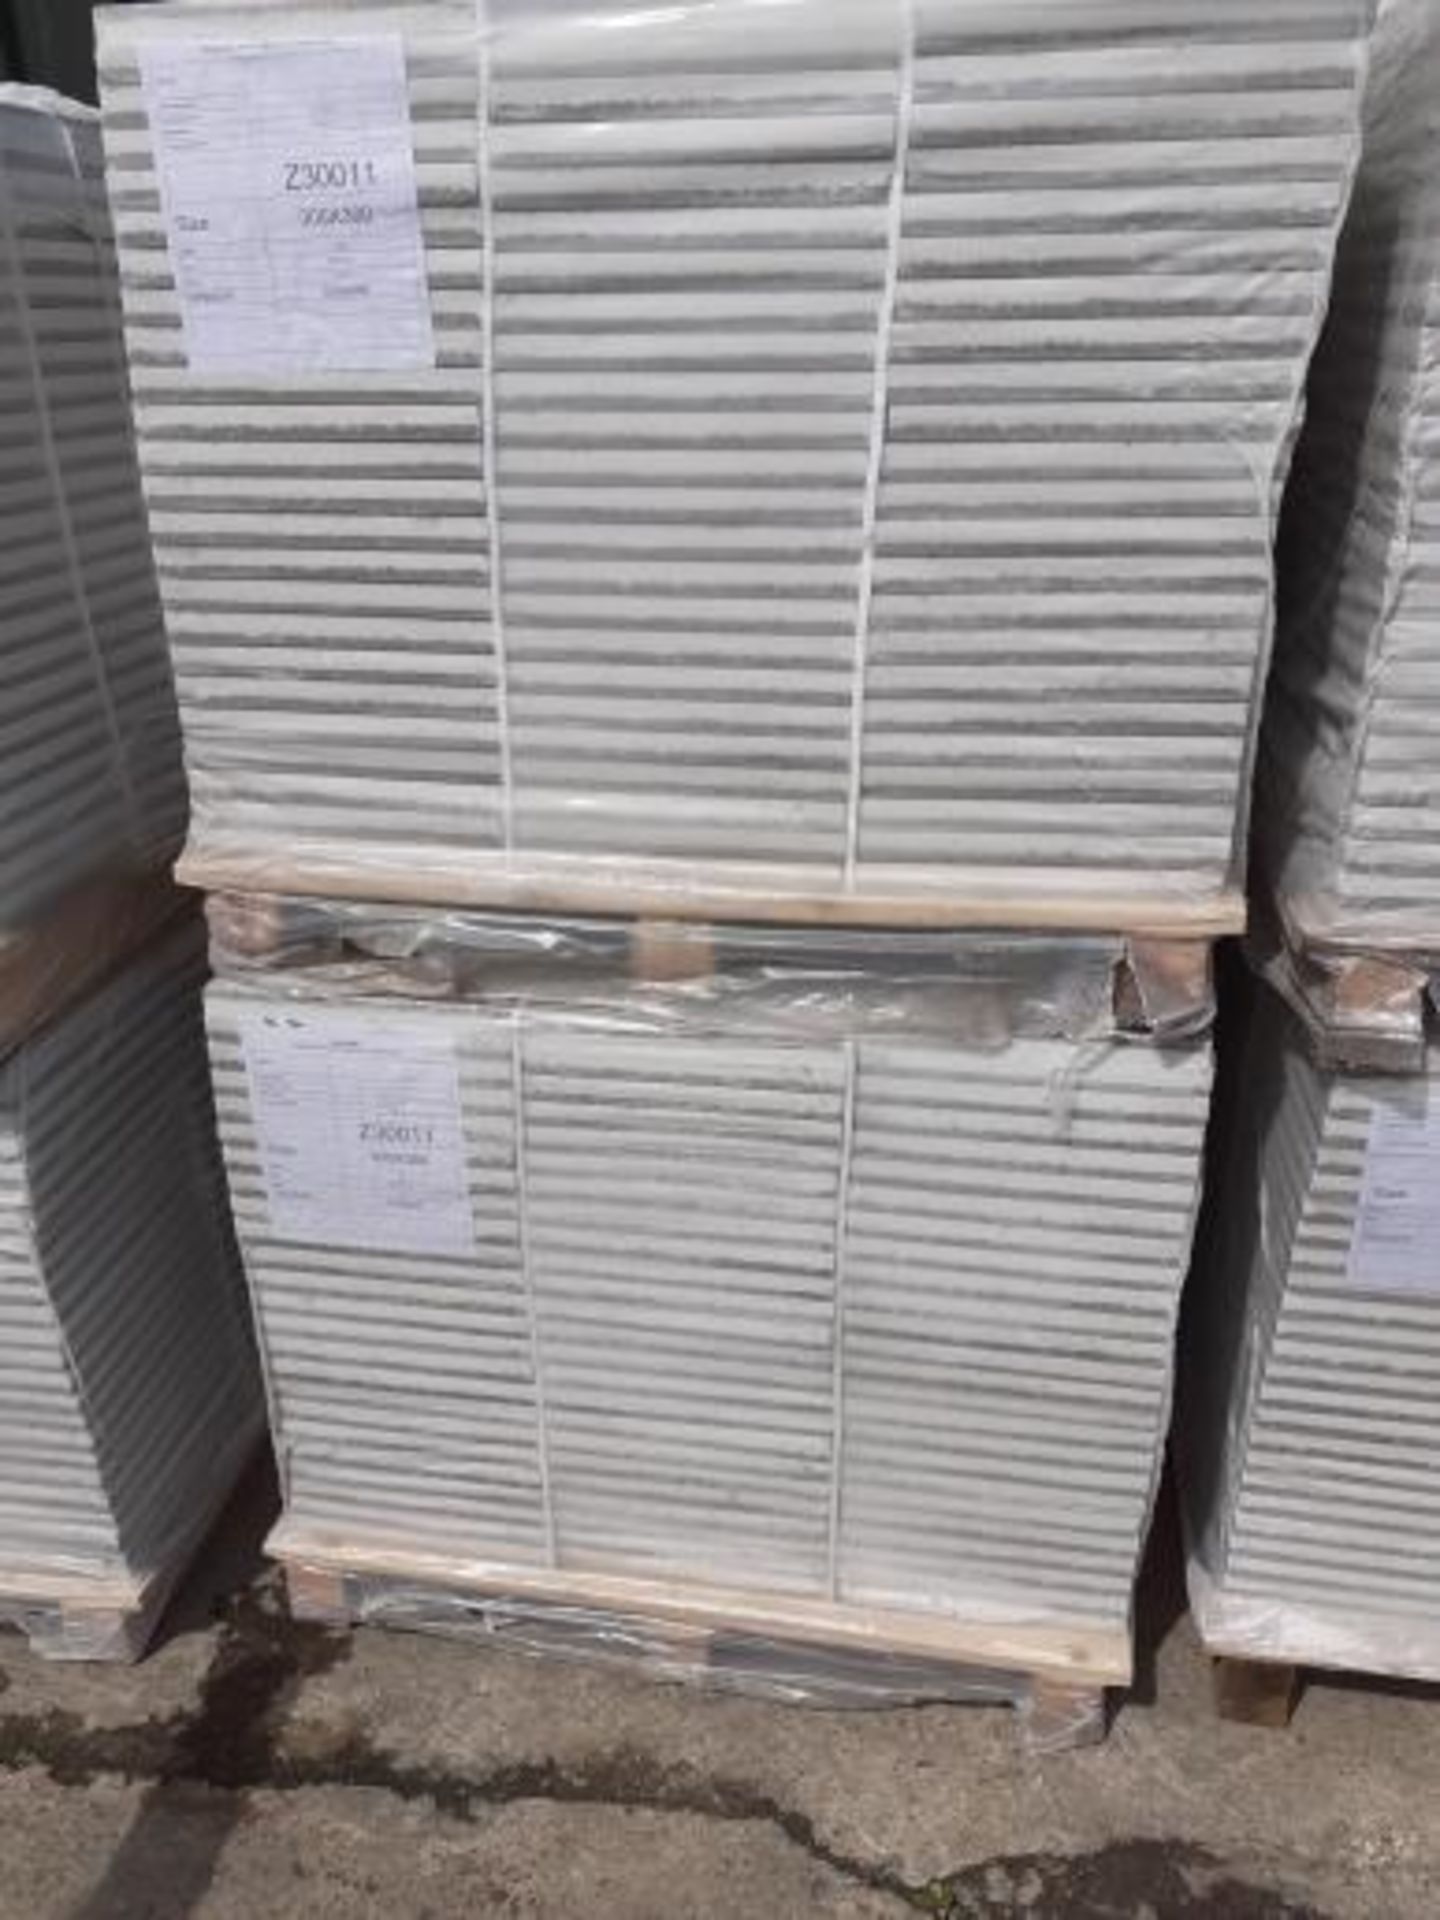 1 PALLET OF BRAND NEW TERRAZZO COMMERCIAL FLOOR TILES (Z30011), COVERS 24 SQUARE YARDS *PLUS VAT* - Image 2 of 15